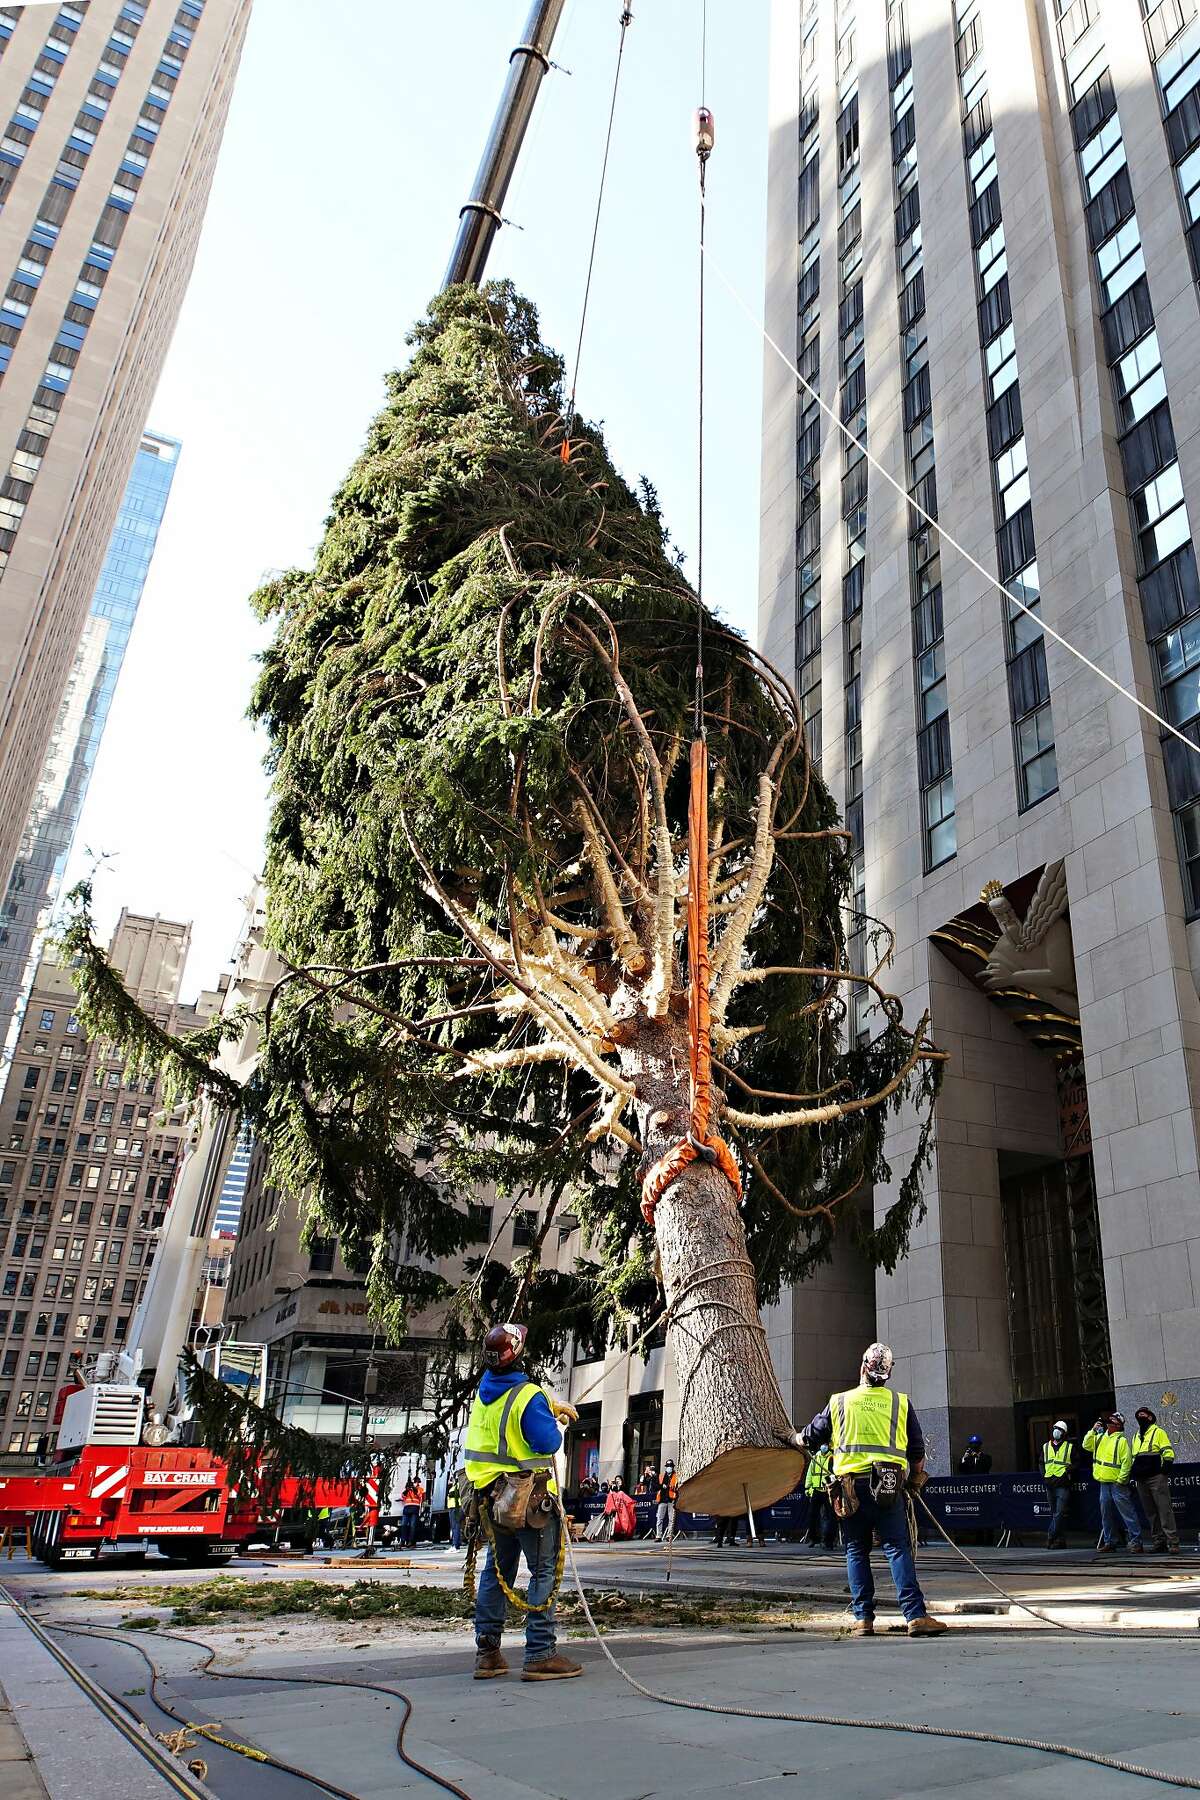 NEW YORK, NEW YORK - NOVEMBER 14: The Rockefeller Center Christmas Tree arrives at Rockefeller Plaza and is craned into place on November 14, 2020 in New York City. (Photo by Cindy Ord/Getty Images)